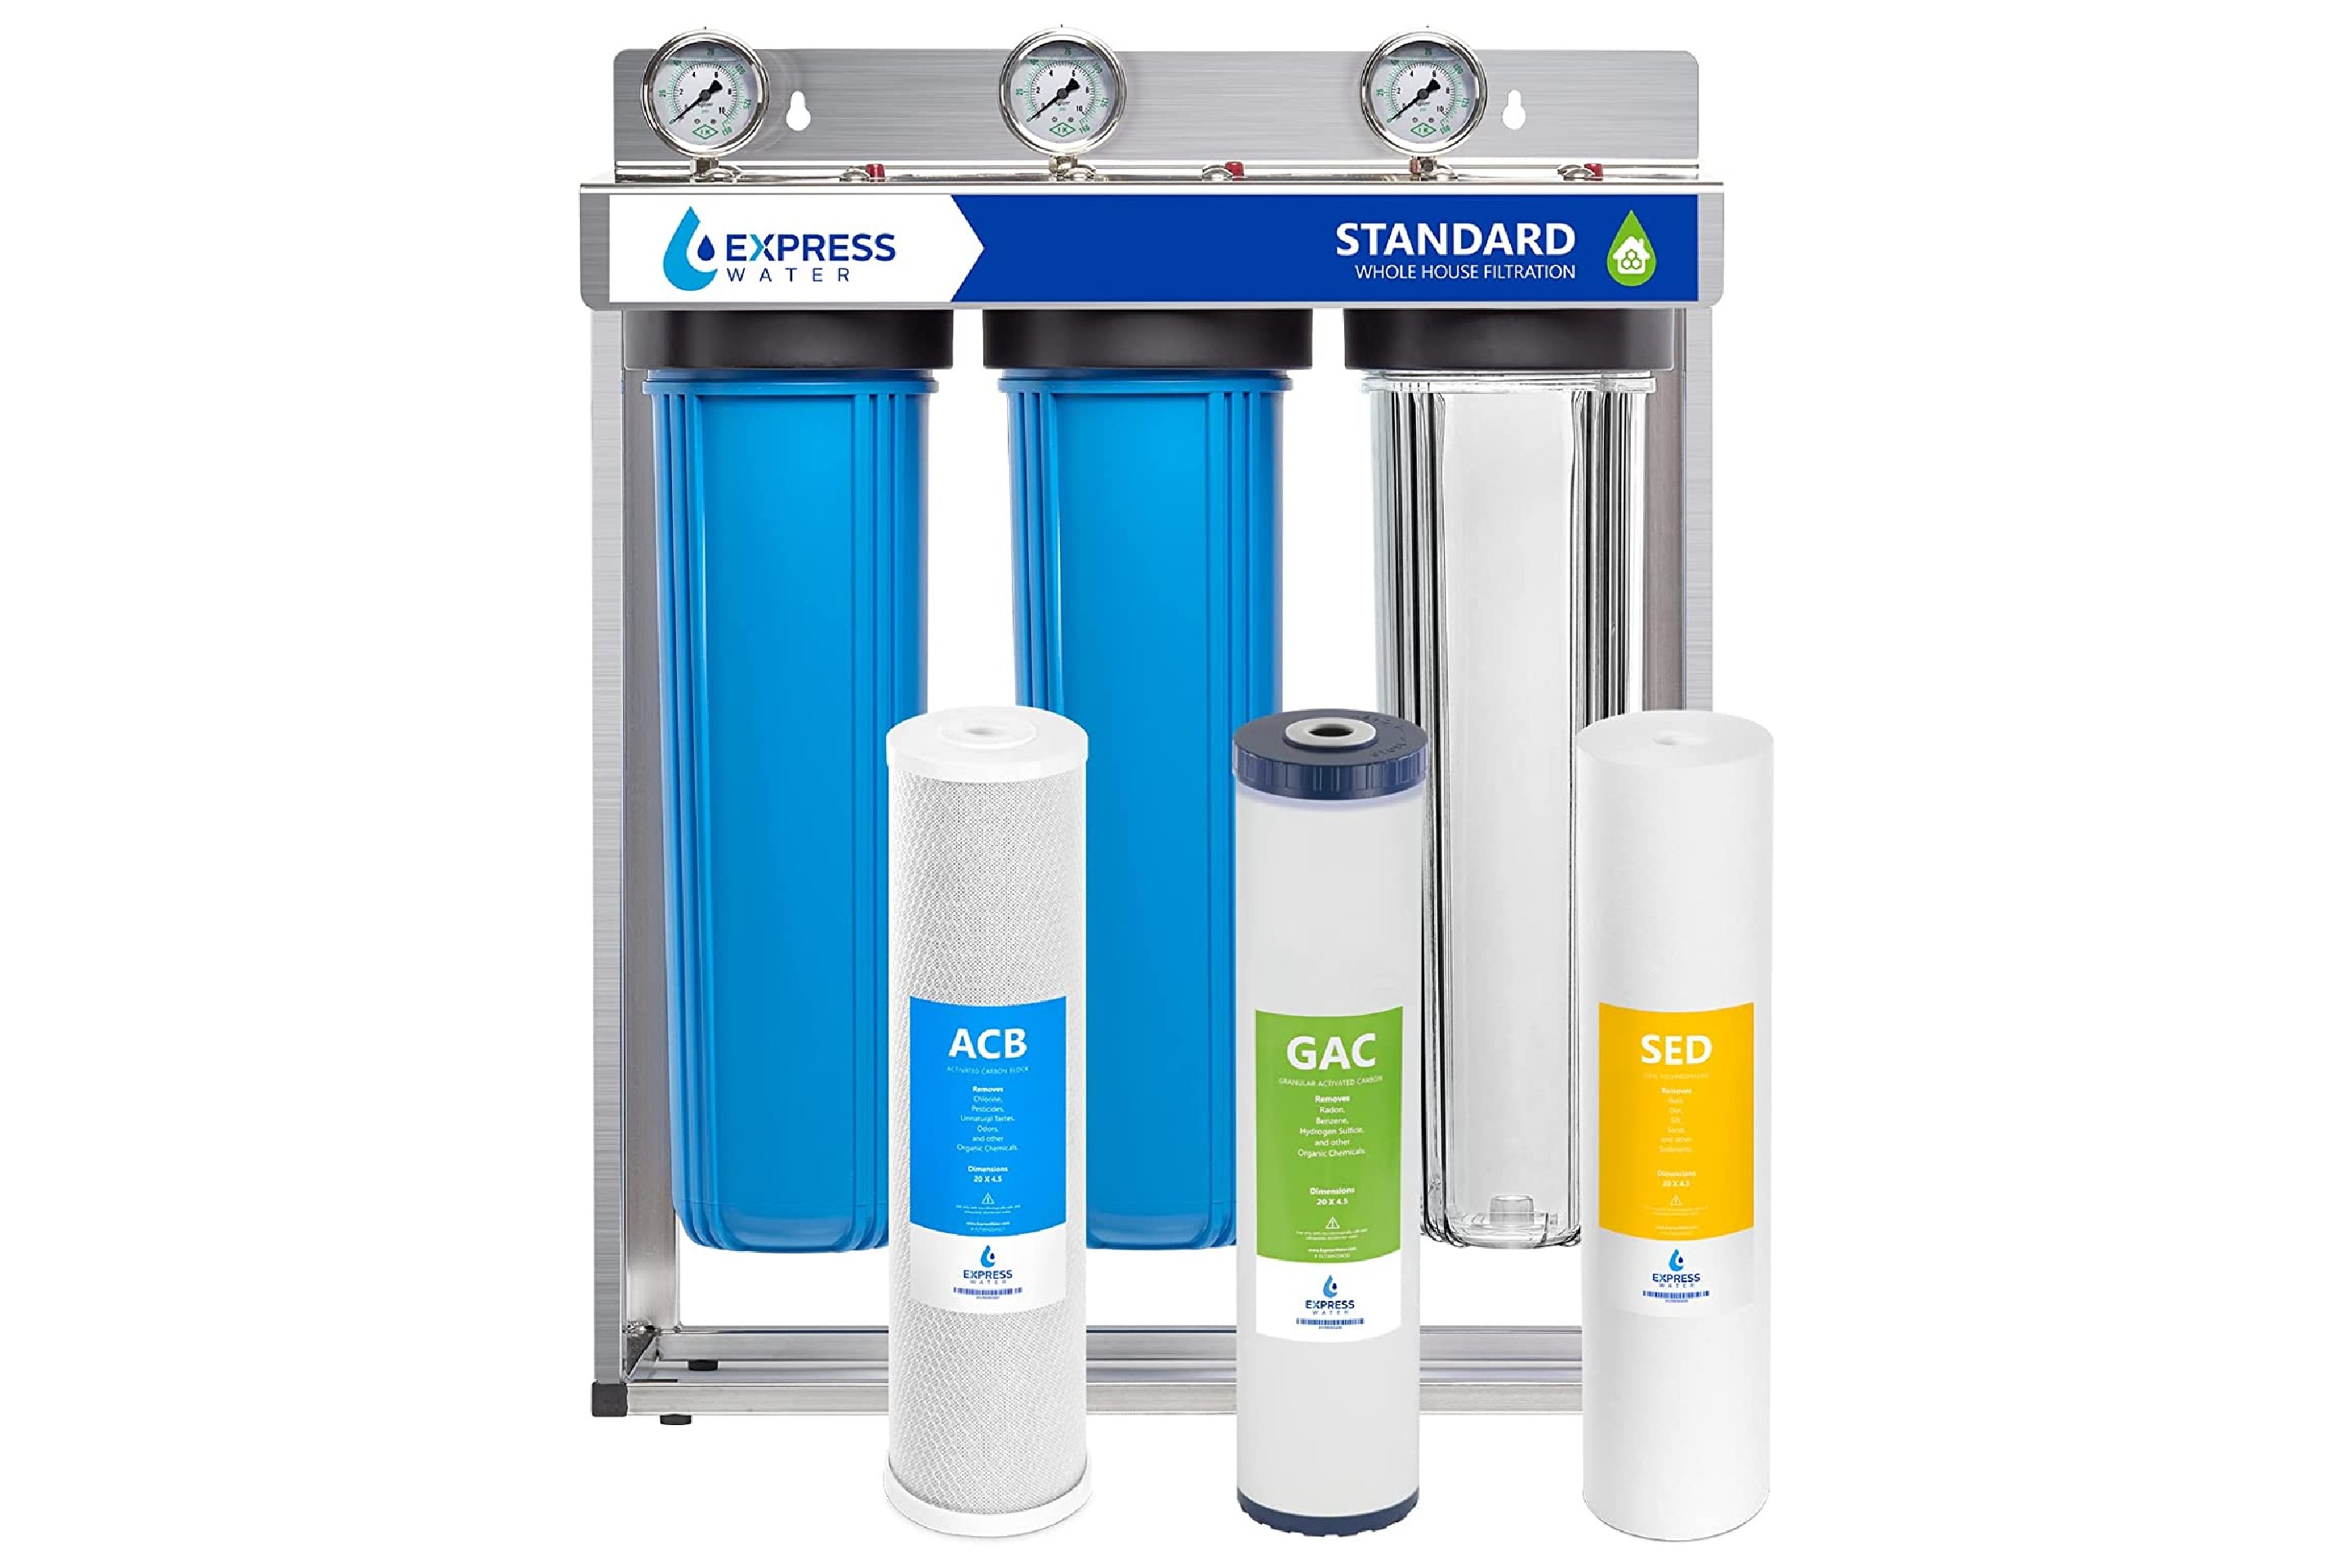 Express Water Whole House Water Filtration System